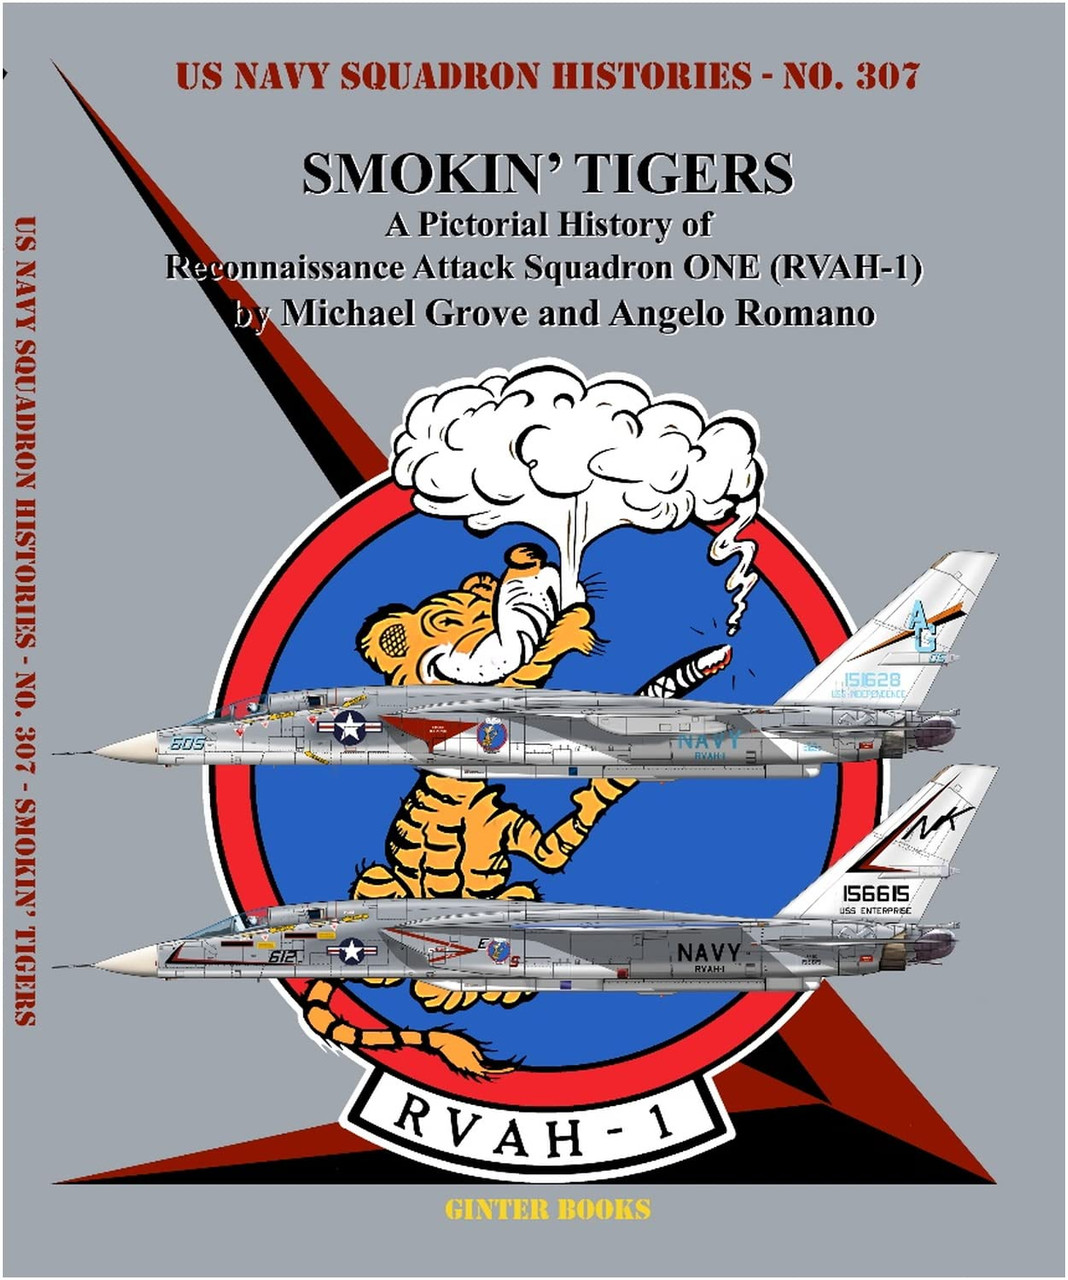 NF307 - Smokin' Tigers: A Pictorial History of Reconnaissance Attack Squadron One (RVAH-1)